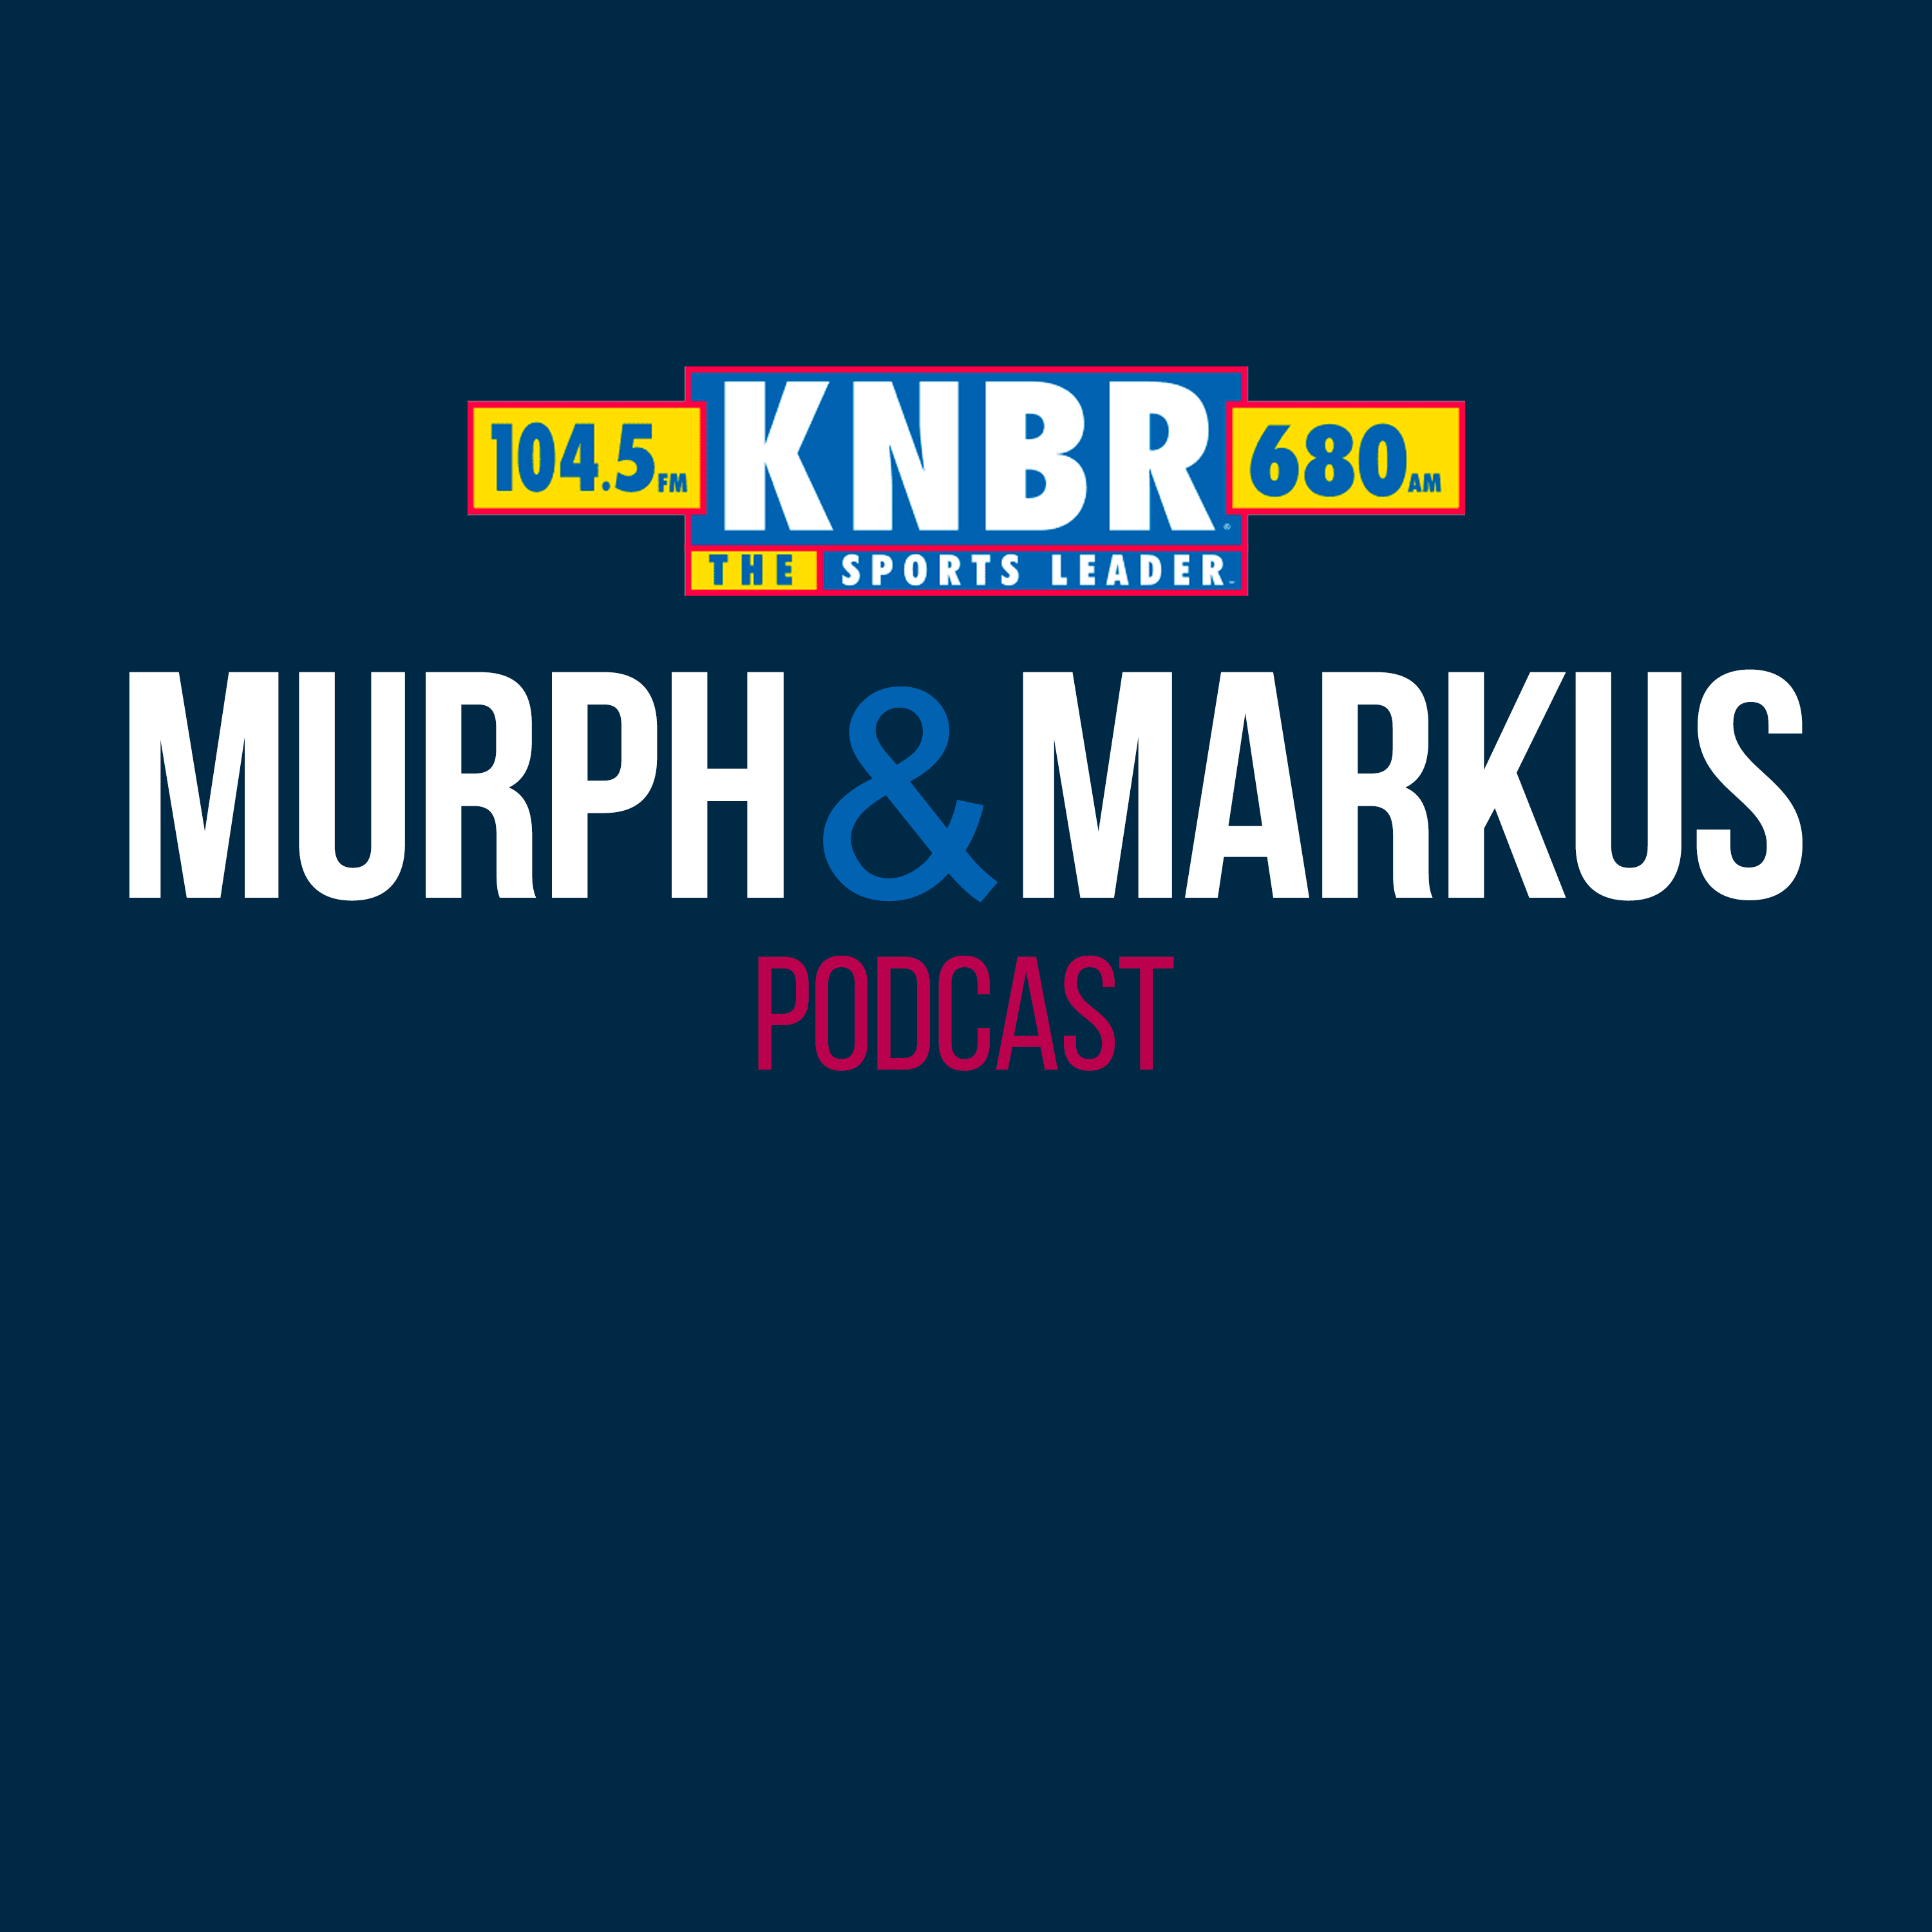 5-6 Hour 1: Murph & Markus react to the Giants losing three in a row to the Phillies, discuss what went wrong, & recap the weekend in sports in Humms & Bums